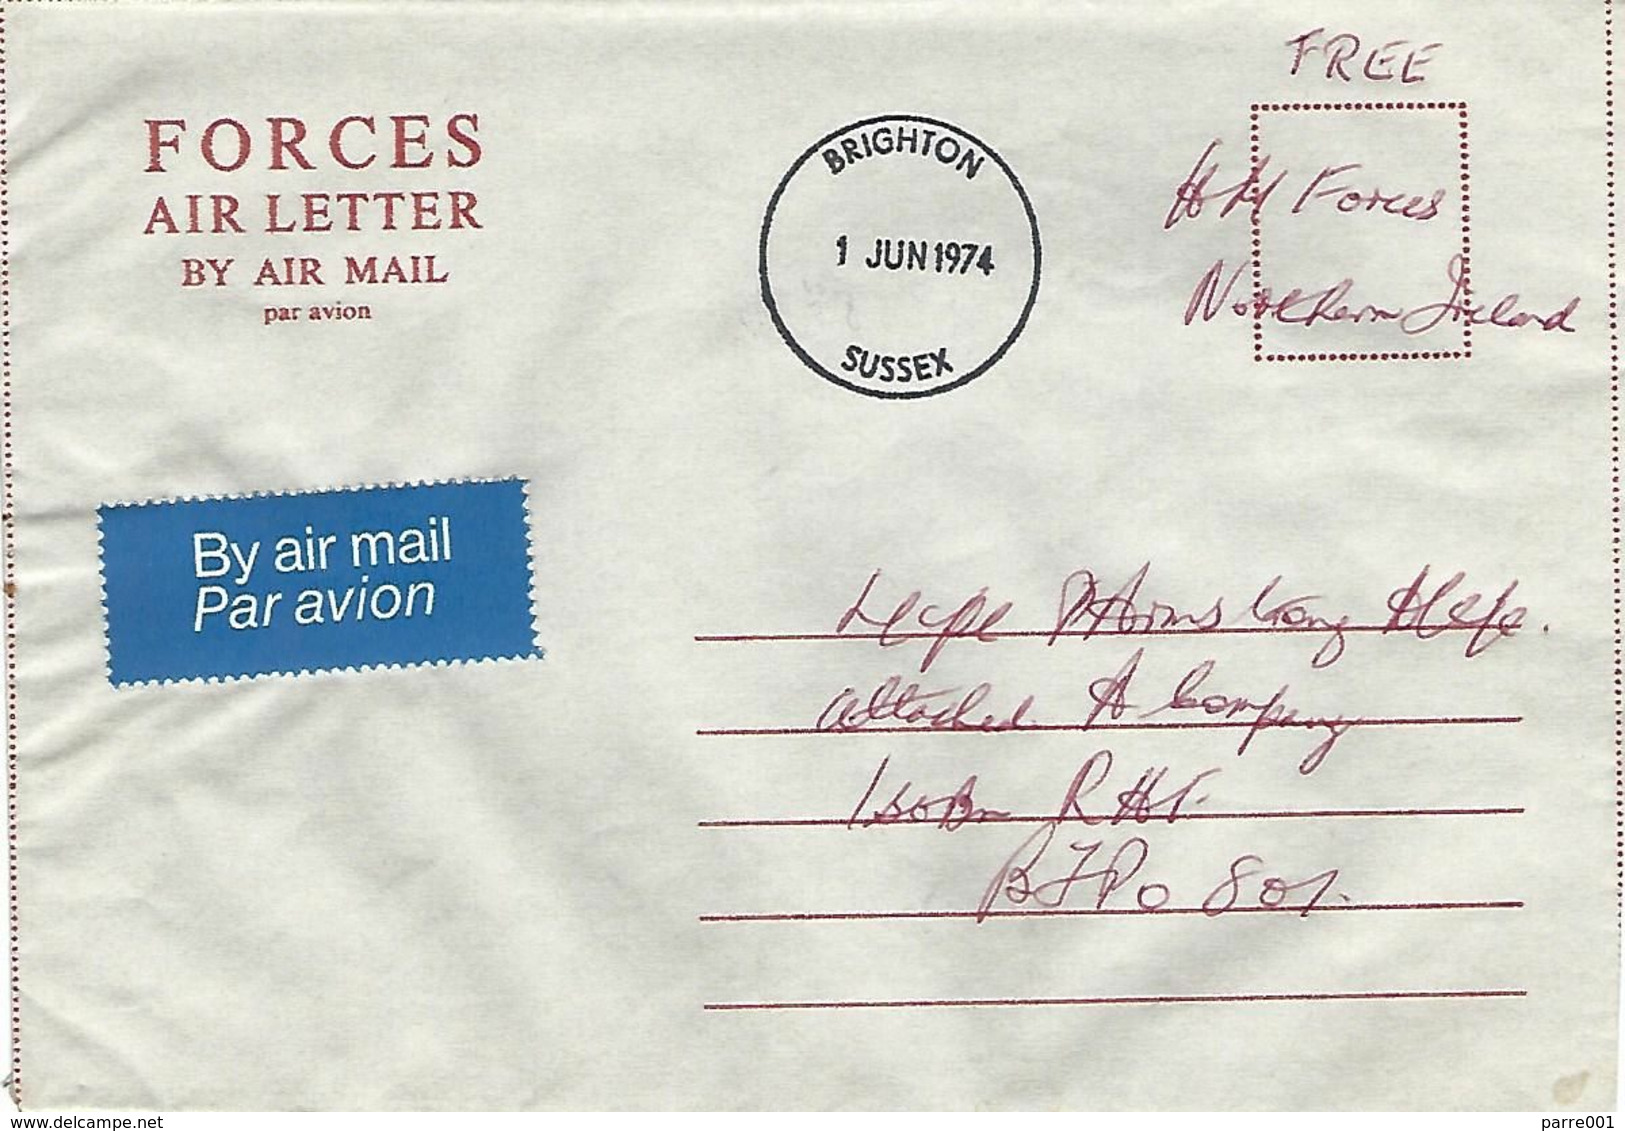 Northern Ireland 1974 BFPO 801 IRA Campaign Forces Mail Free FDC Cover - Militaria